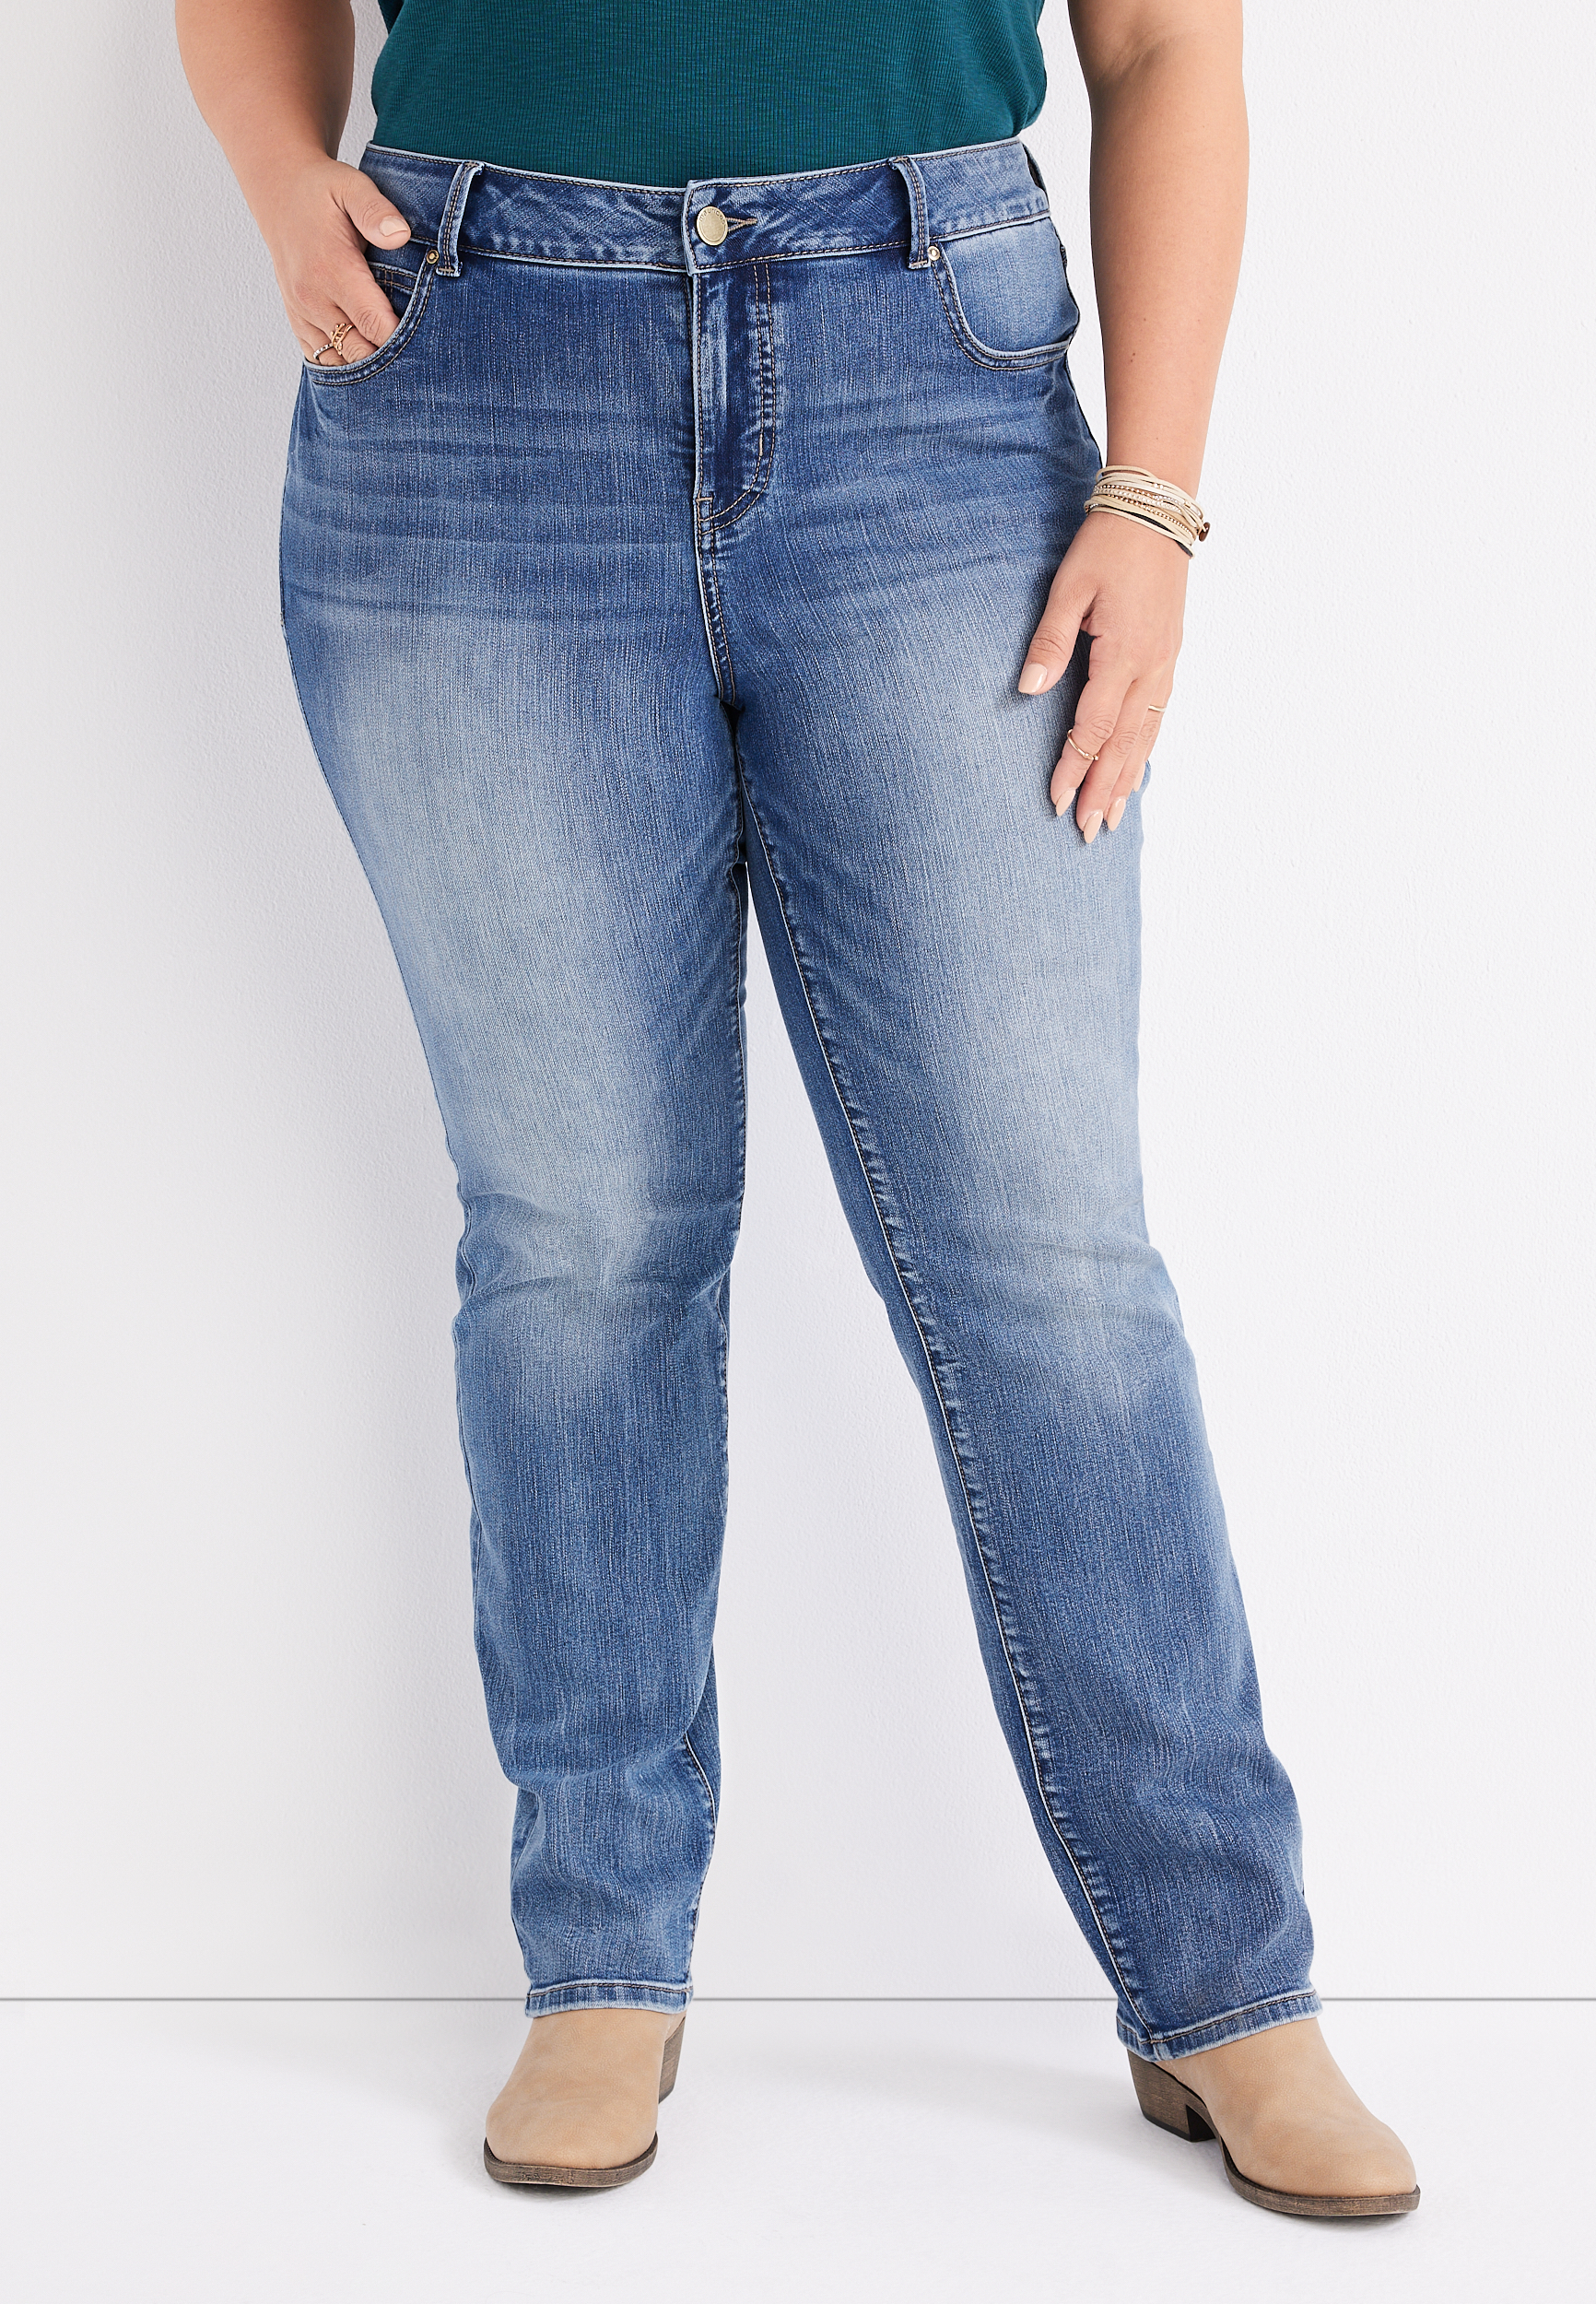 Plus Size m jeans by maurices™ Everflex™ Straight Mid Rise Jean | maurices